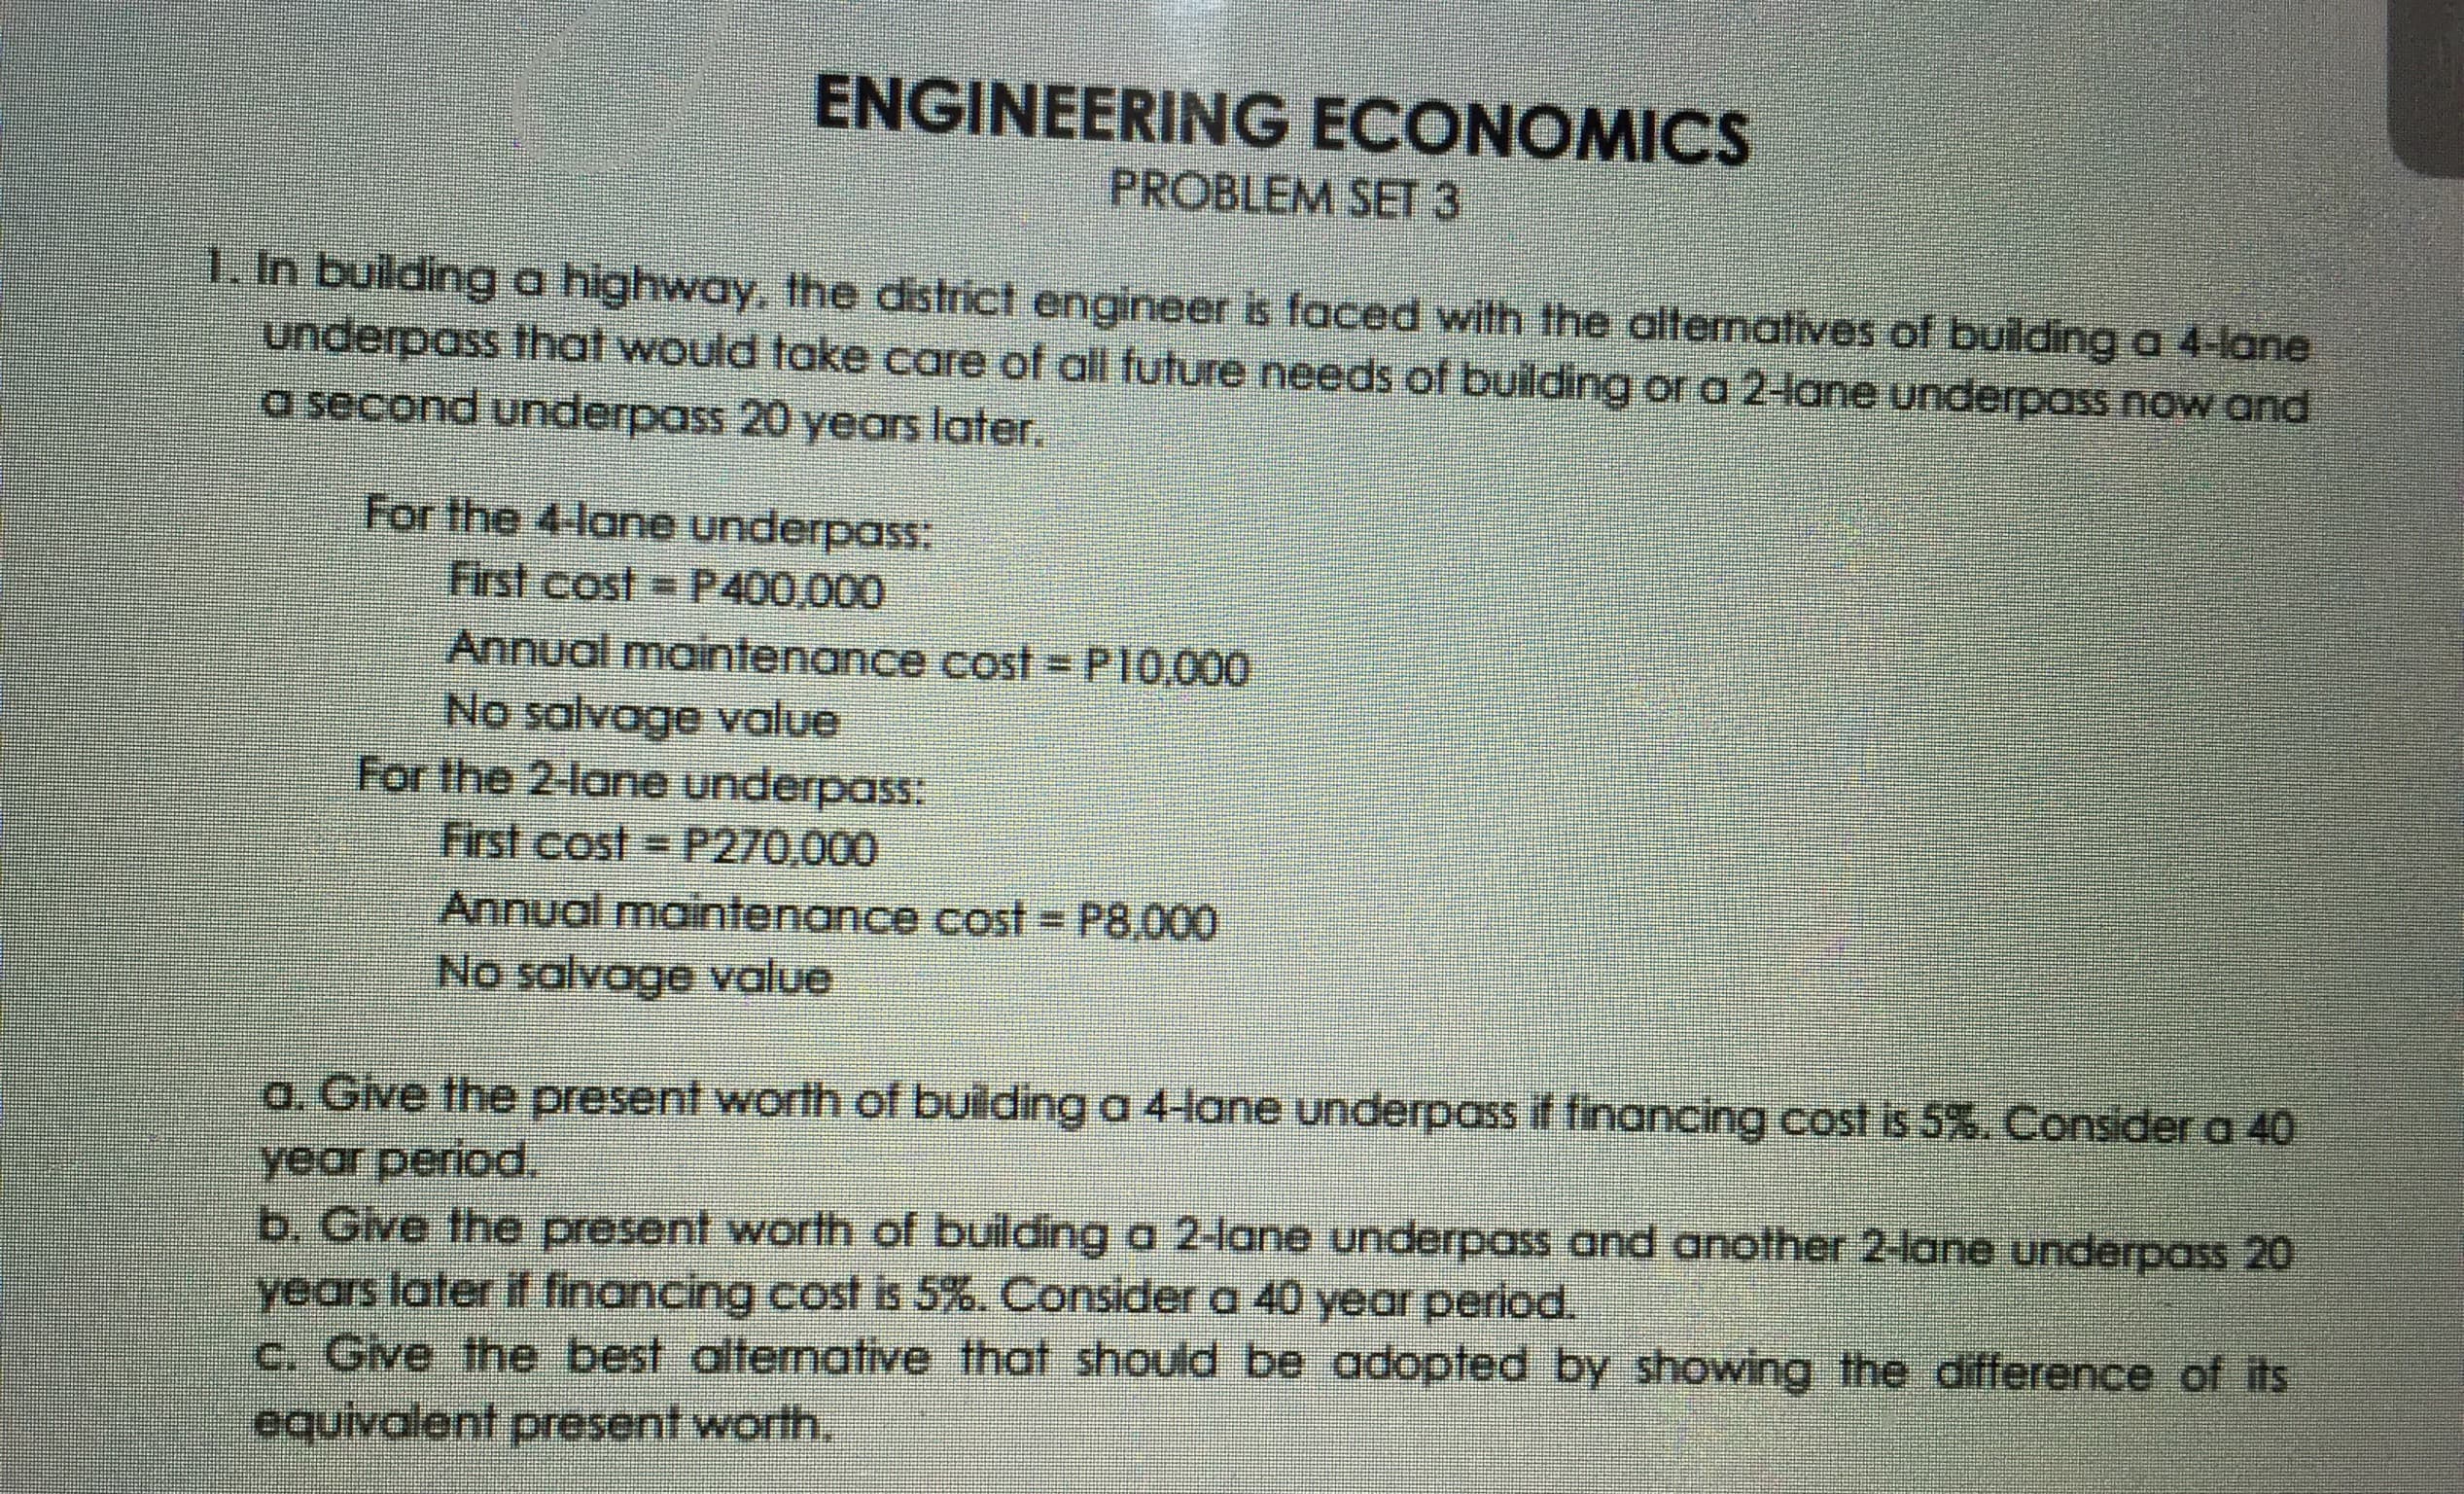 Dulding a hghway, the district engineer e faced with the ollematives of bulding a 4-lane
Unde pass Ihal would take care of ali tuture needs of puidlng of a 2 ane underpas now and
e second underpass 20 years later.
For the lane underpass
Frst cost = P400,000
Annual maintenance cost = PI0.000
No salvage value
For the 2-lane underpass
First cost = P270.000
Annual maintenance cost P8.000
No salvage value
